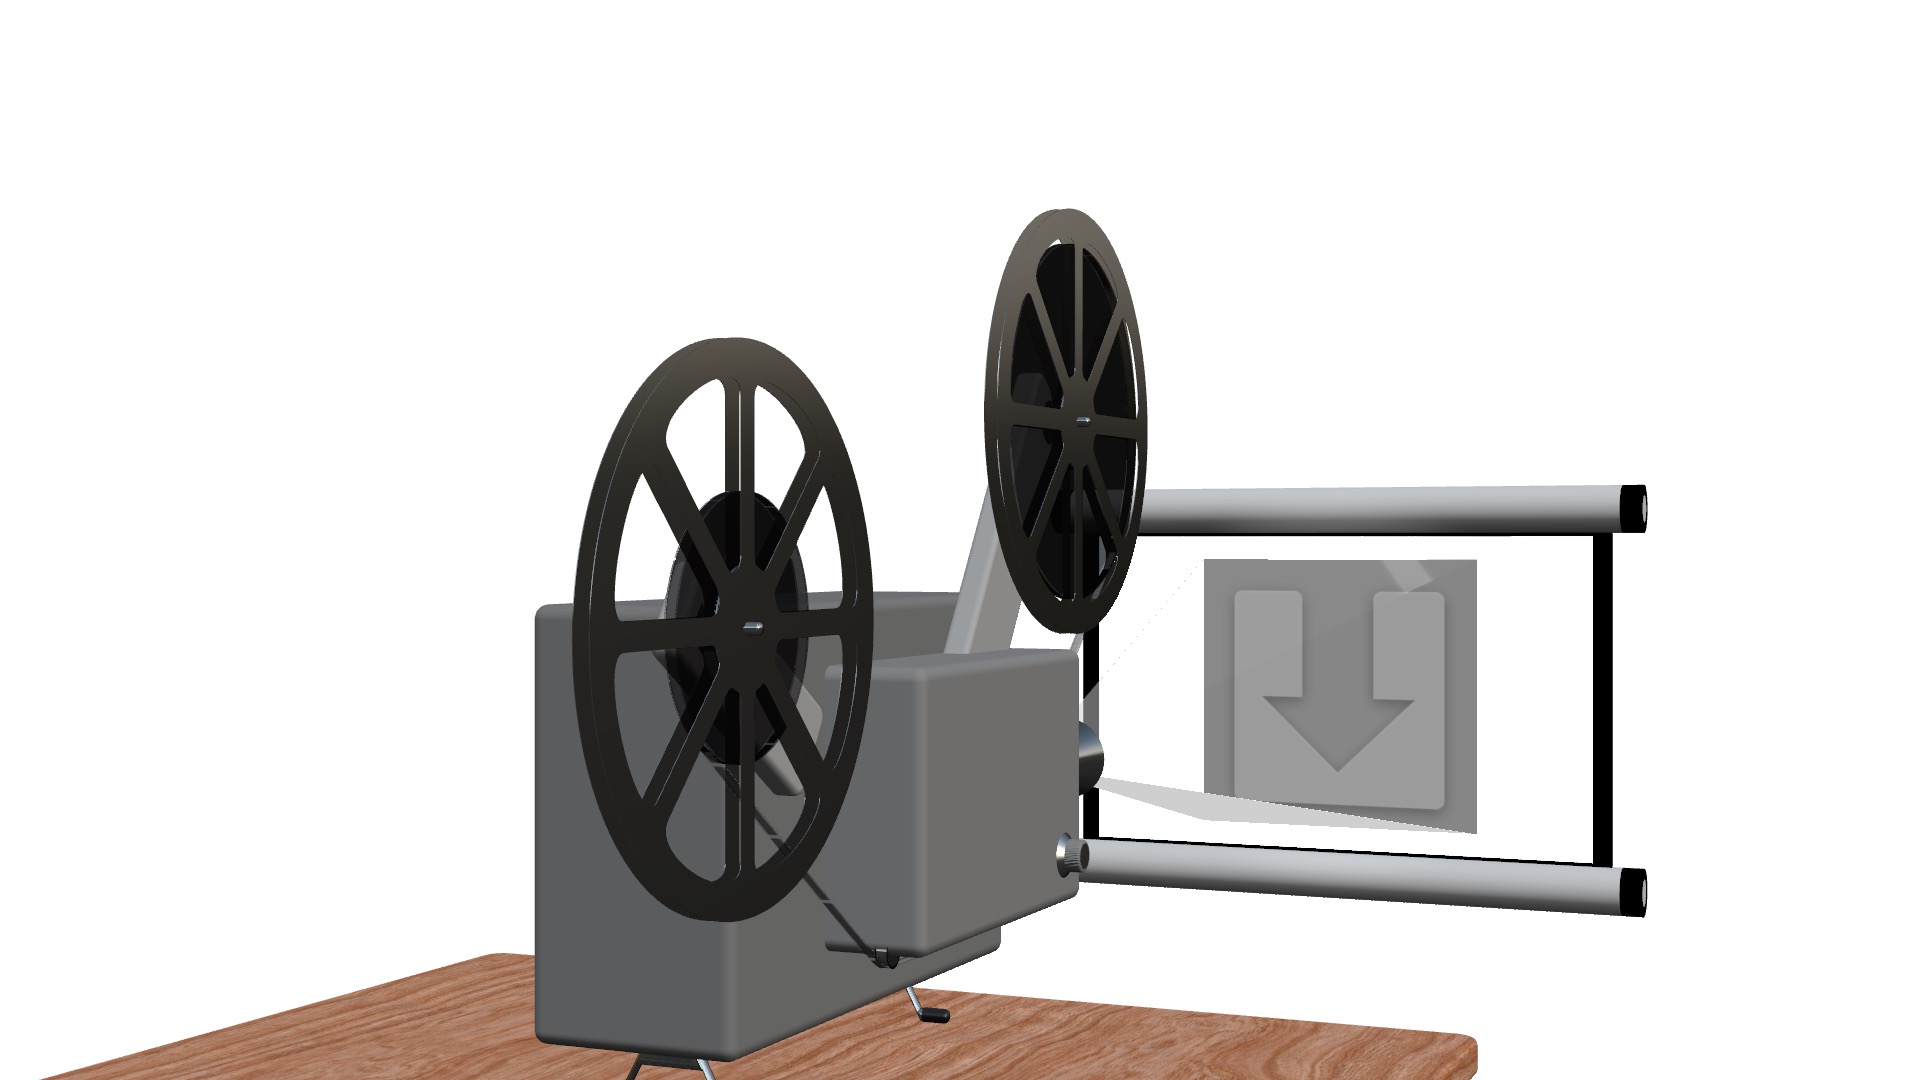 Projector 3D Model made in Motion